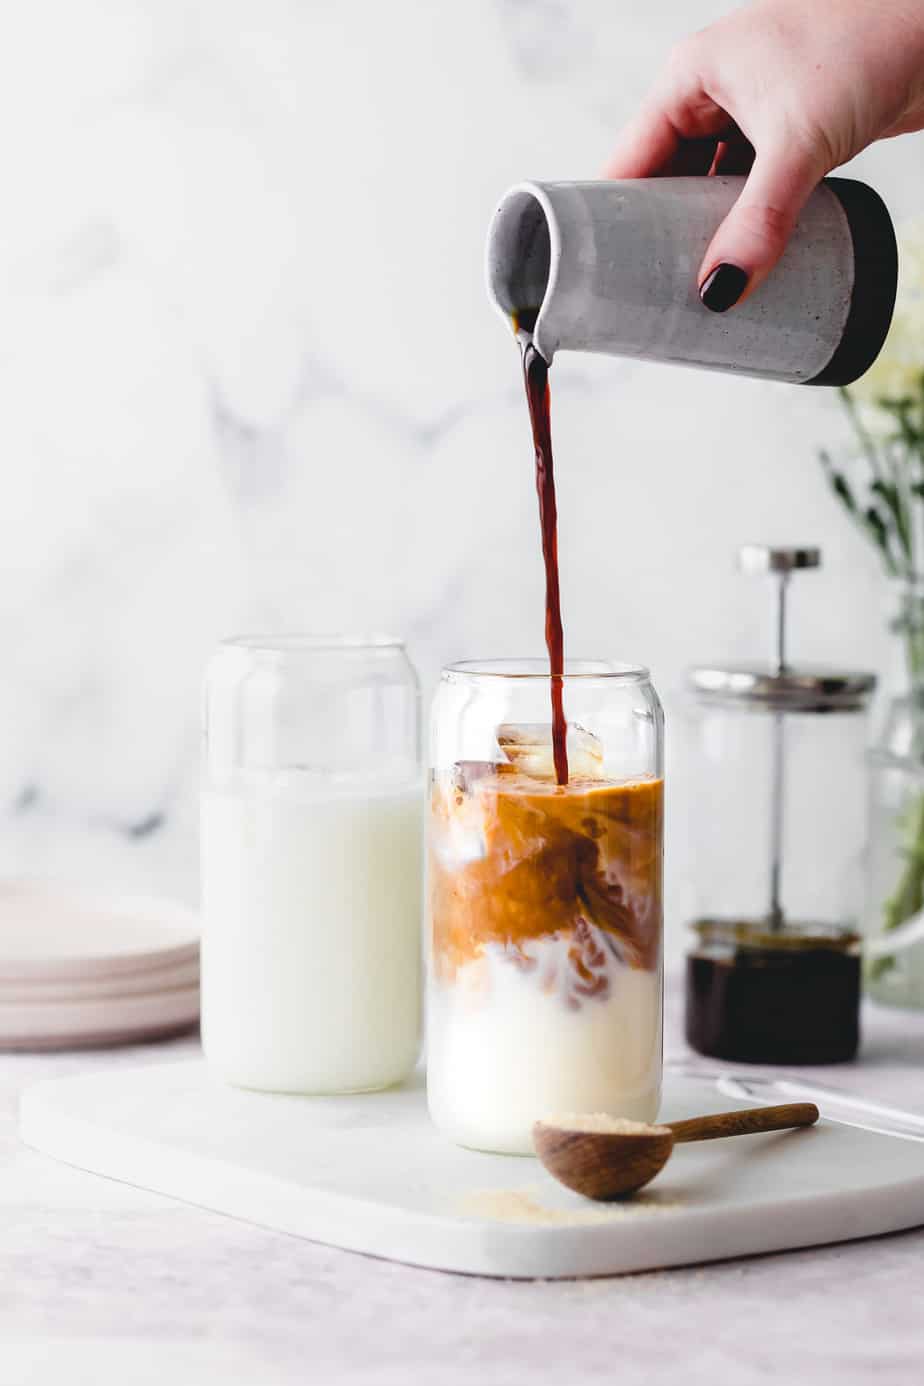 Coffee pouring into a glass of milk.